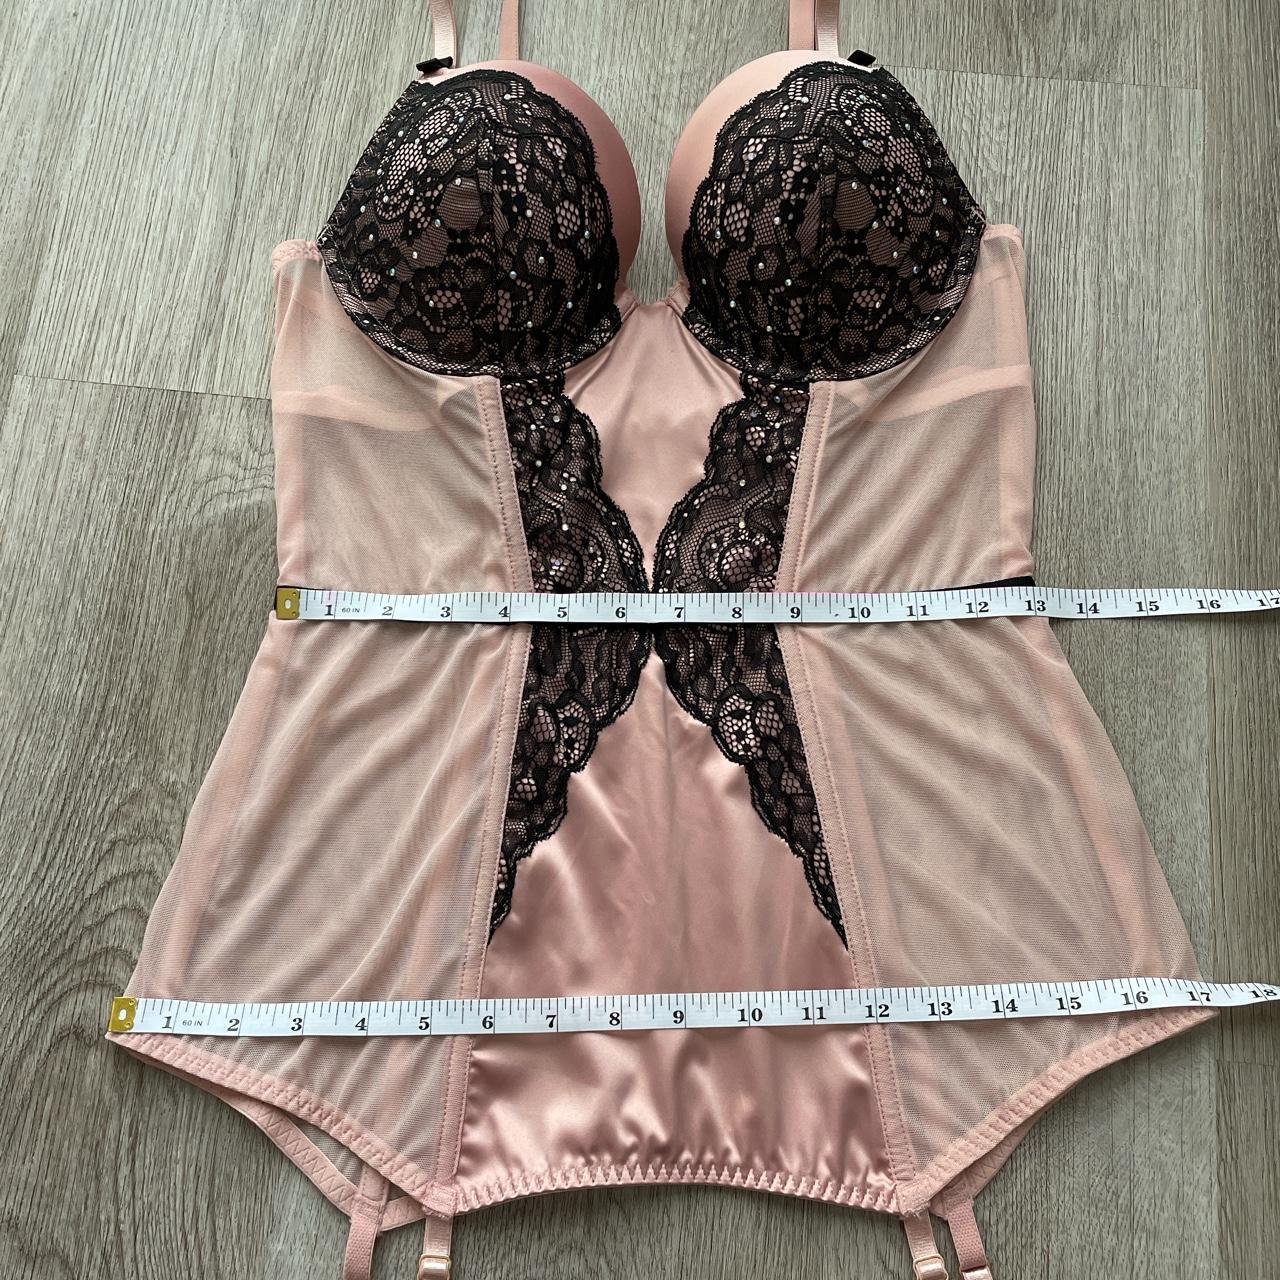 Pink corset from Adore Me with black lace and - Depop